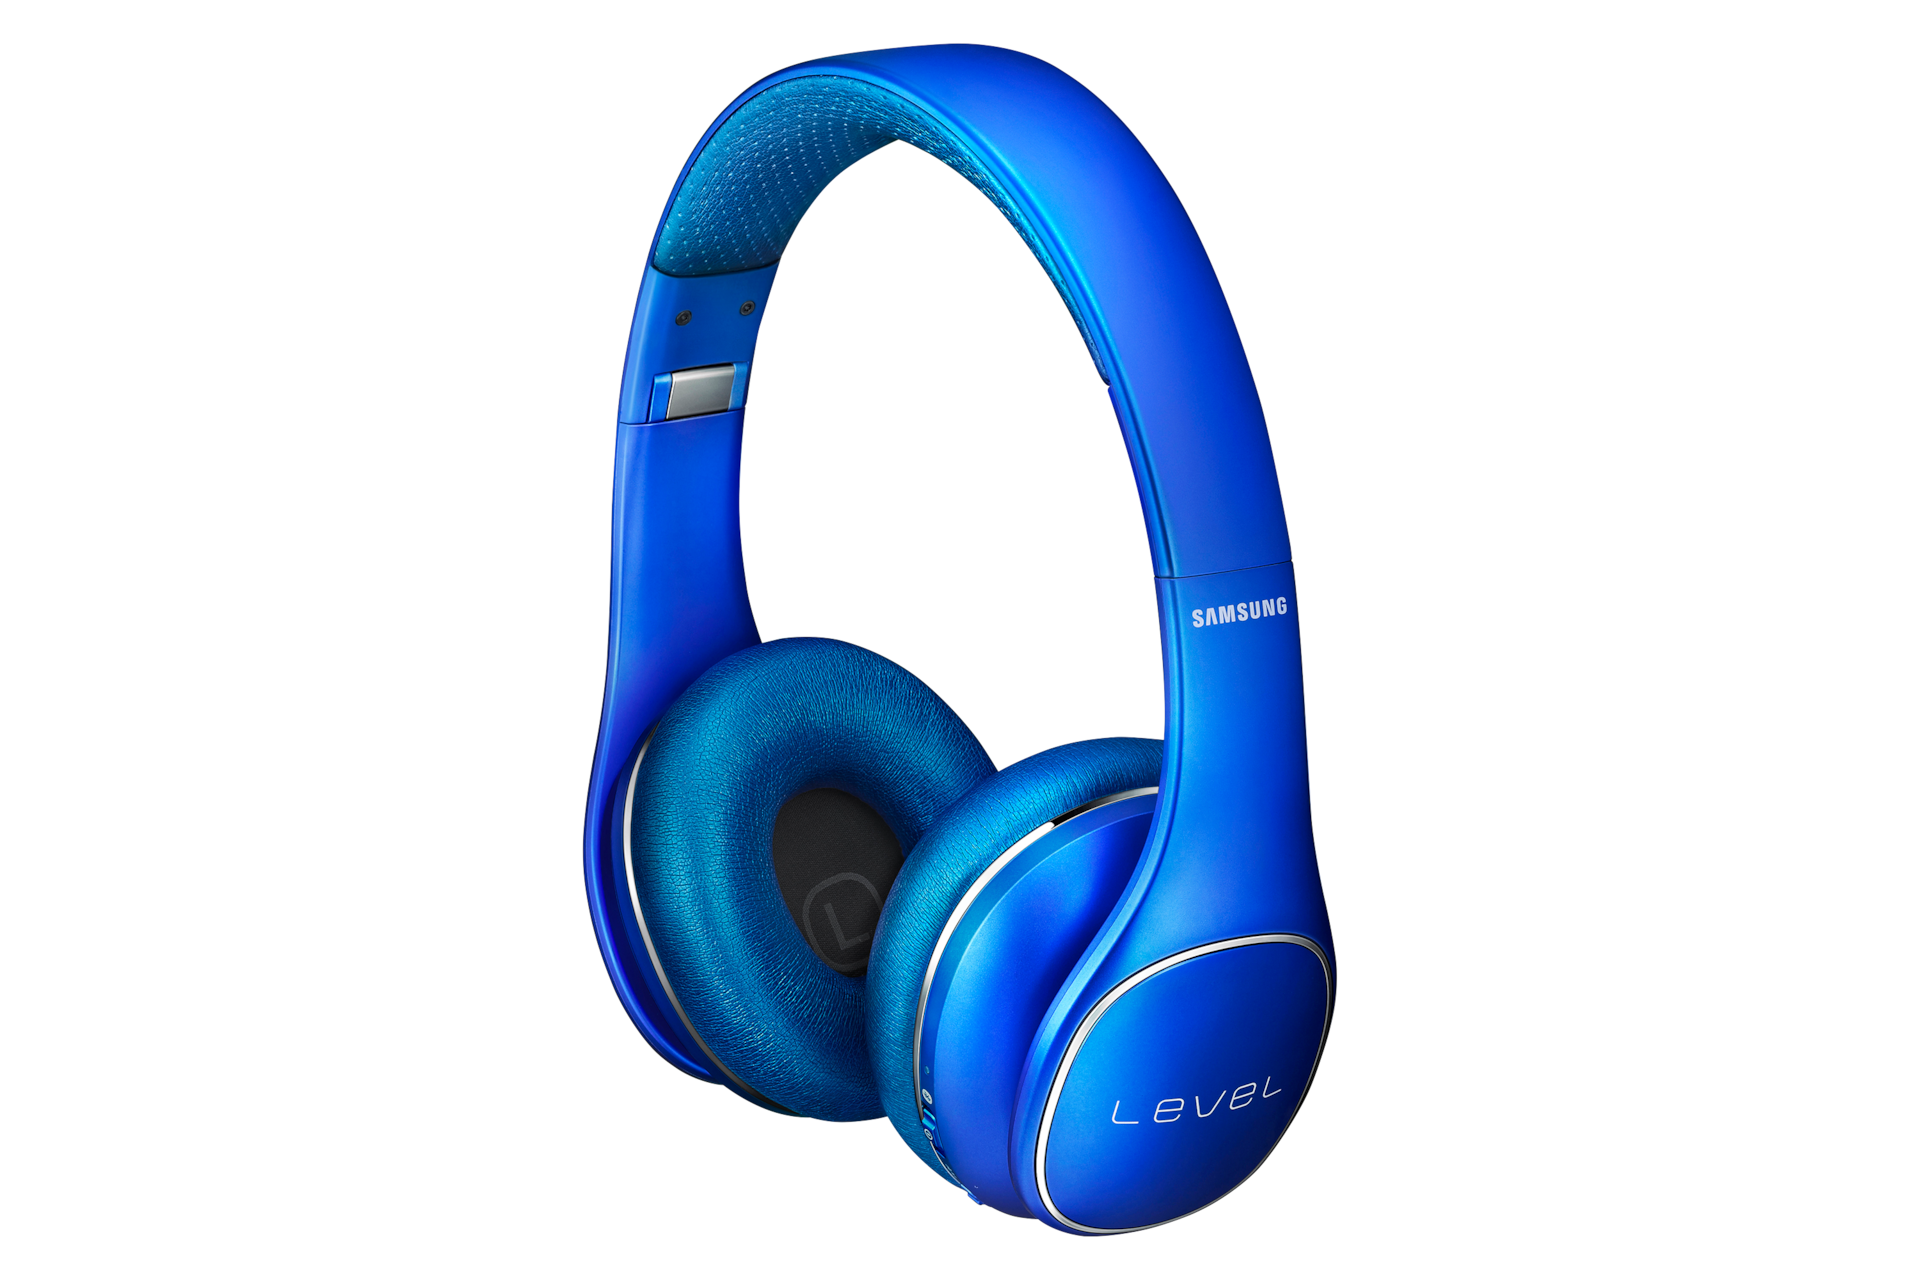 br-level-on-wireless-headset-pn900-eo-pn900blpgbr-000078782-r-perspective-blue